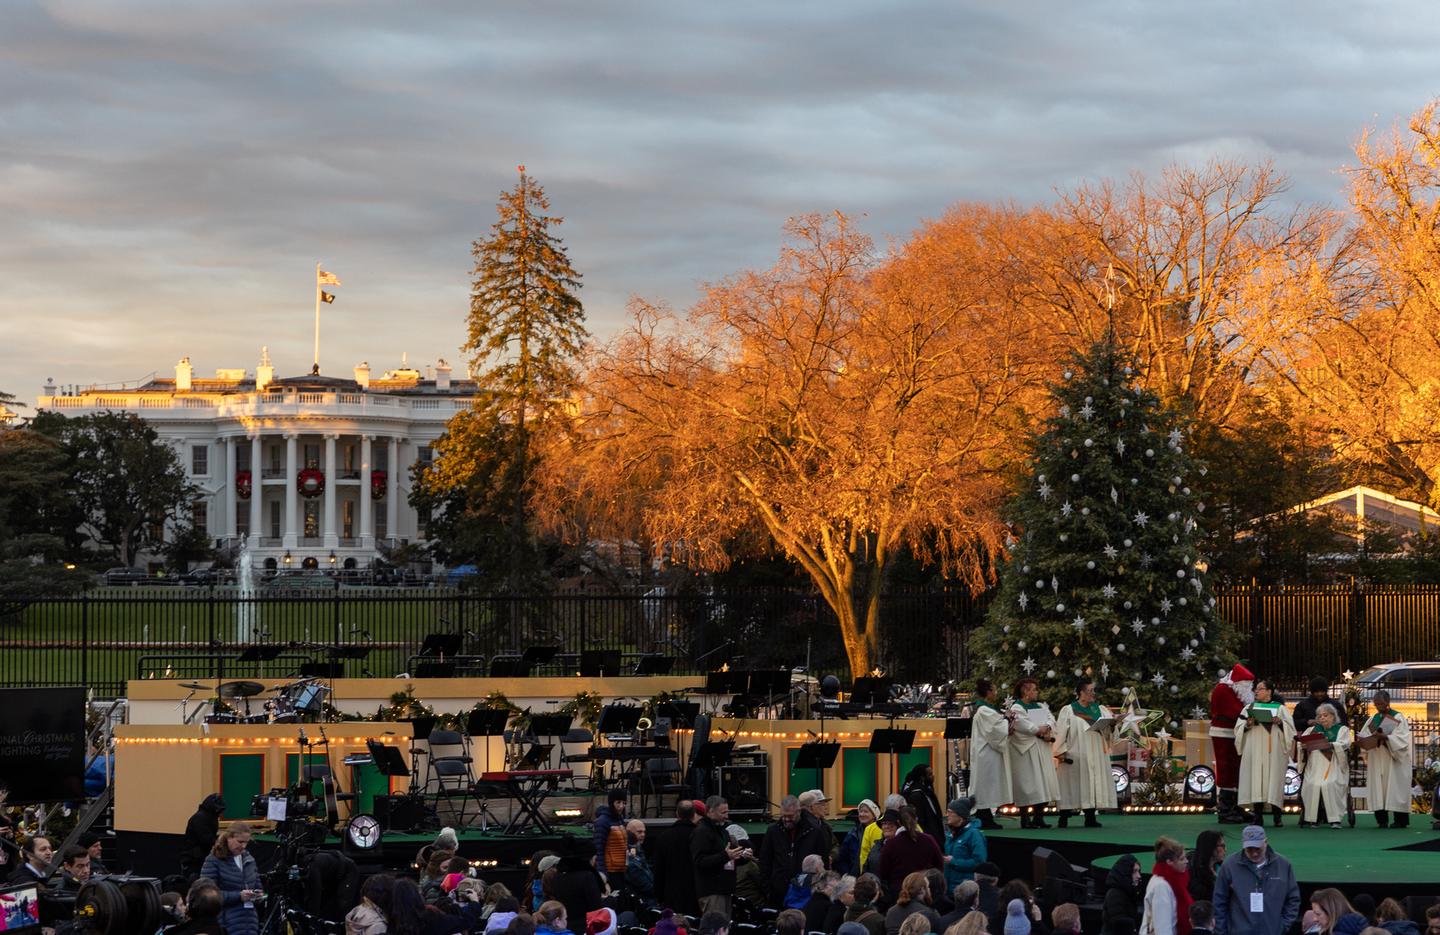 A large Christmas tree stands in front of the white house2022 National Christmas Tree Lighting